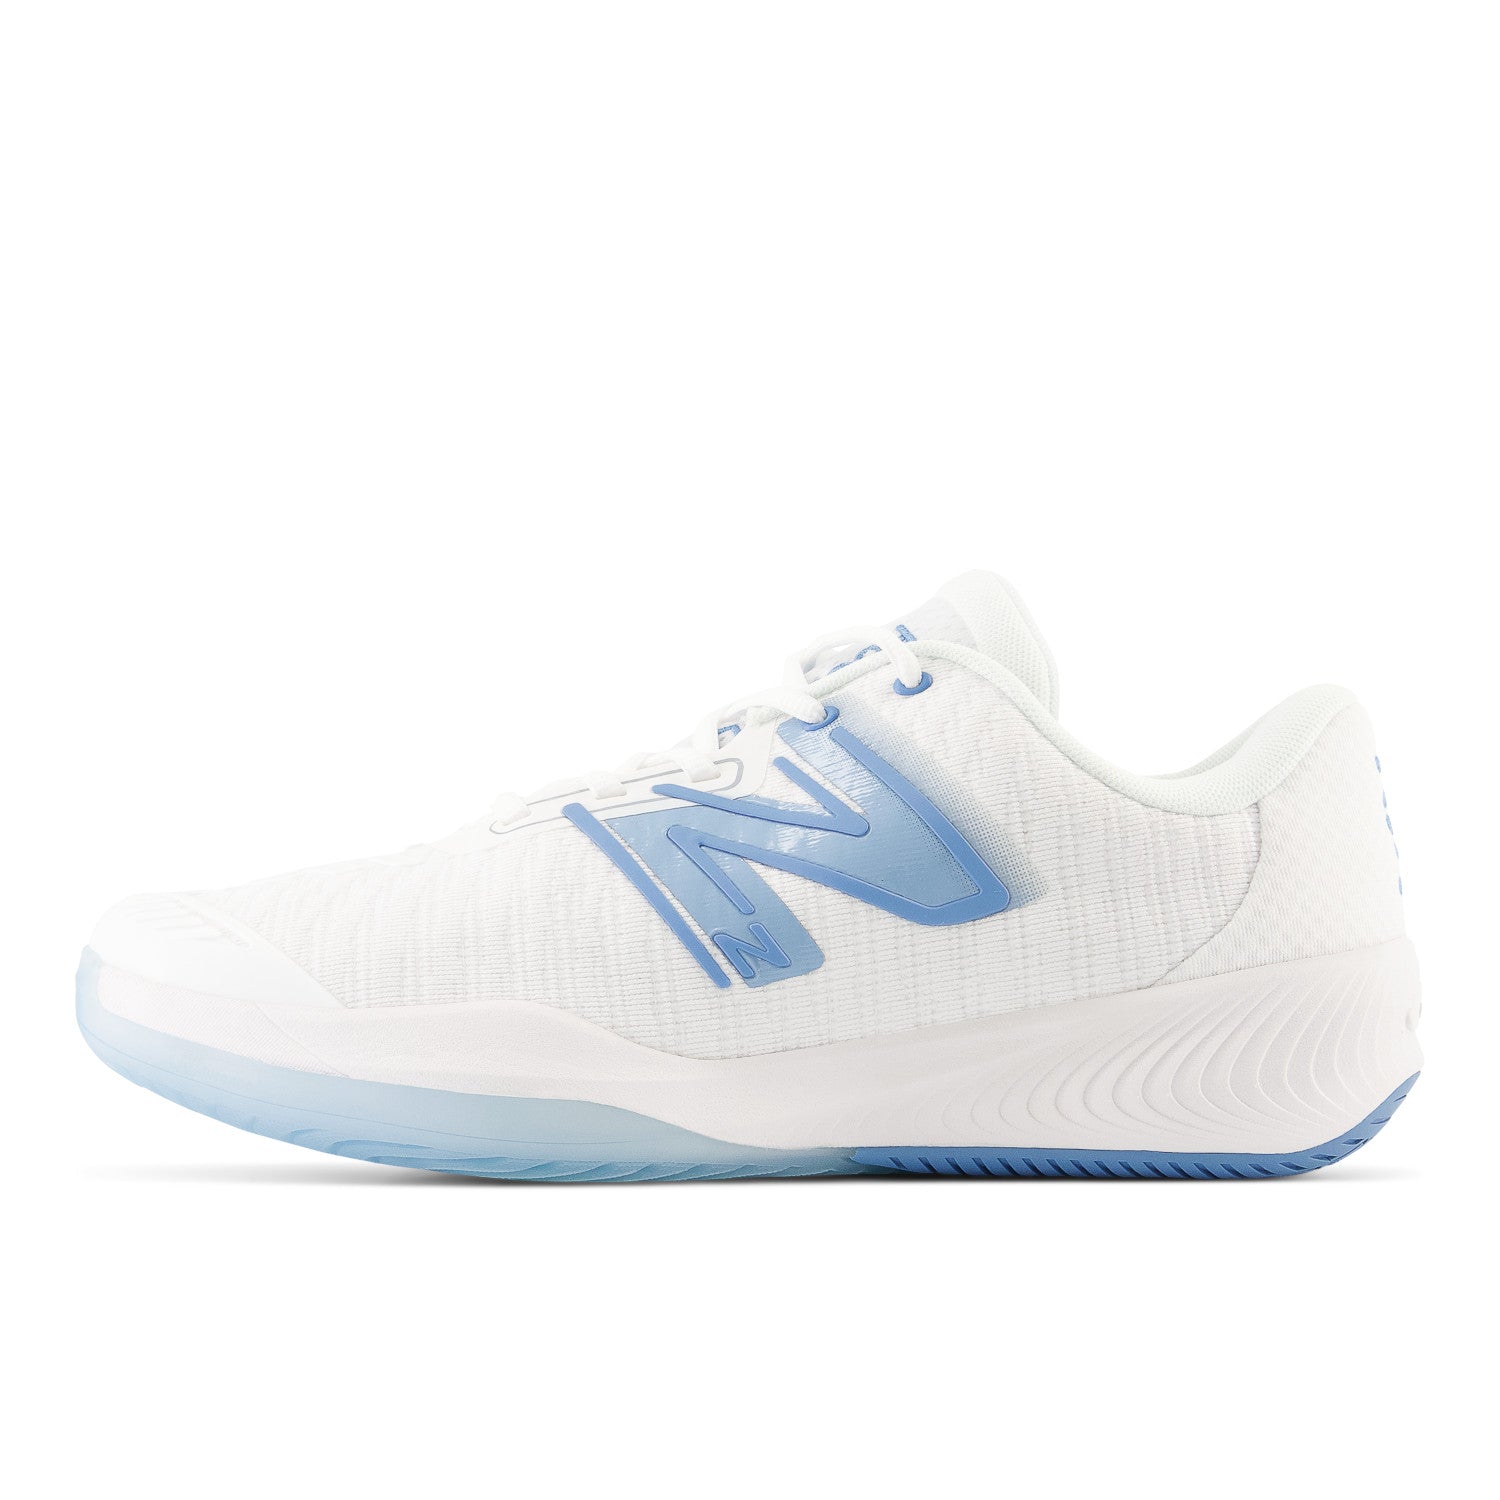 New Balance Fuel Cell 996v5 WCH996N5 Women's9